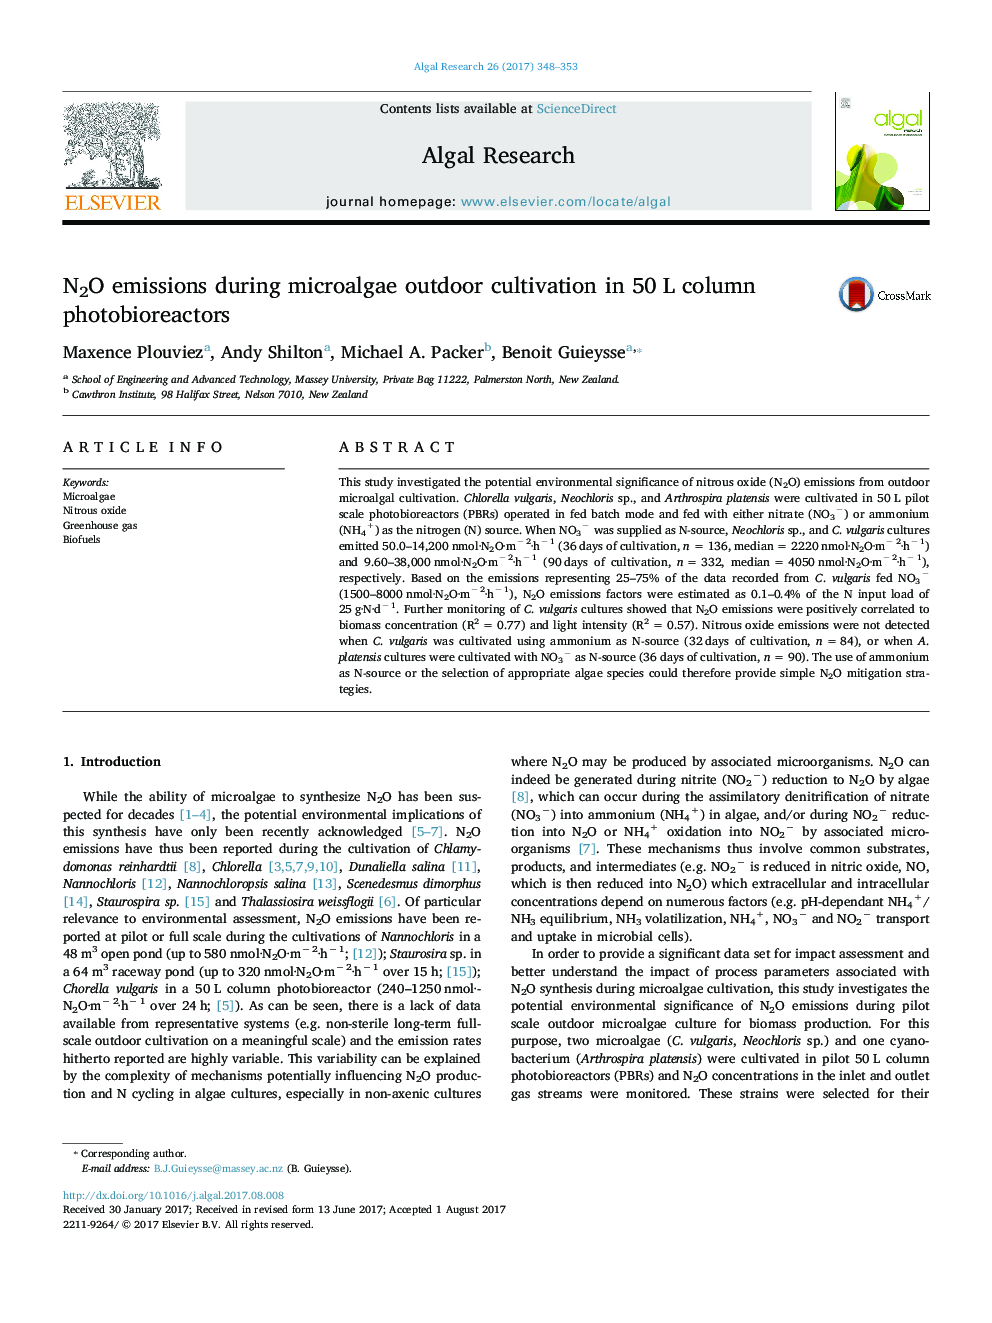 N2O emissions during microalgae outdoor cultivation in 50Â L column photobioreactors